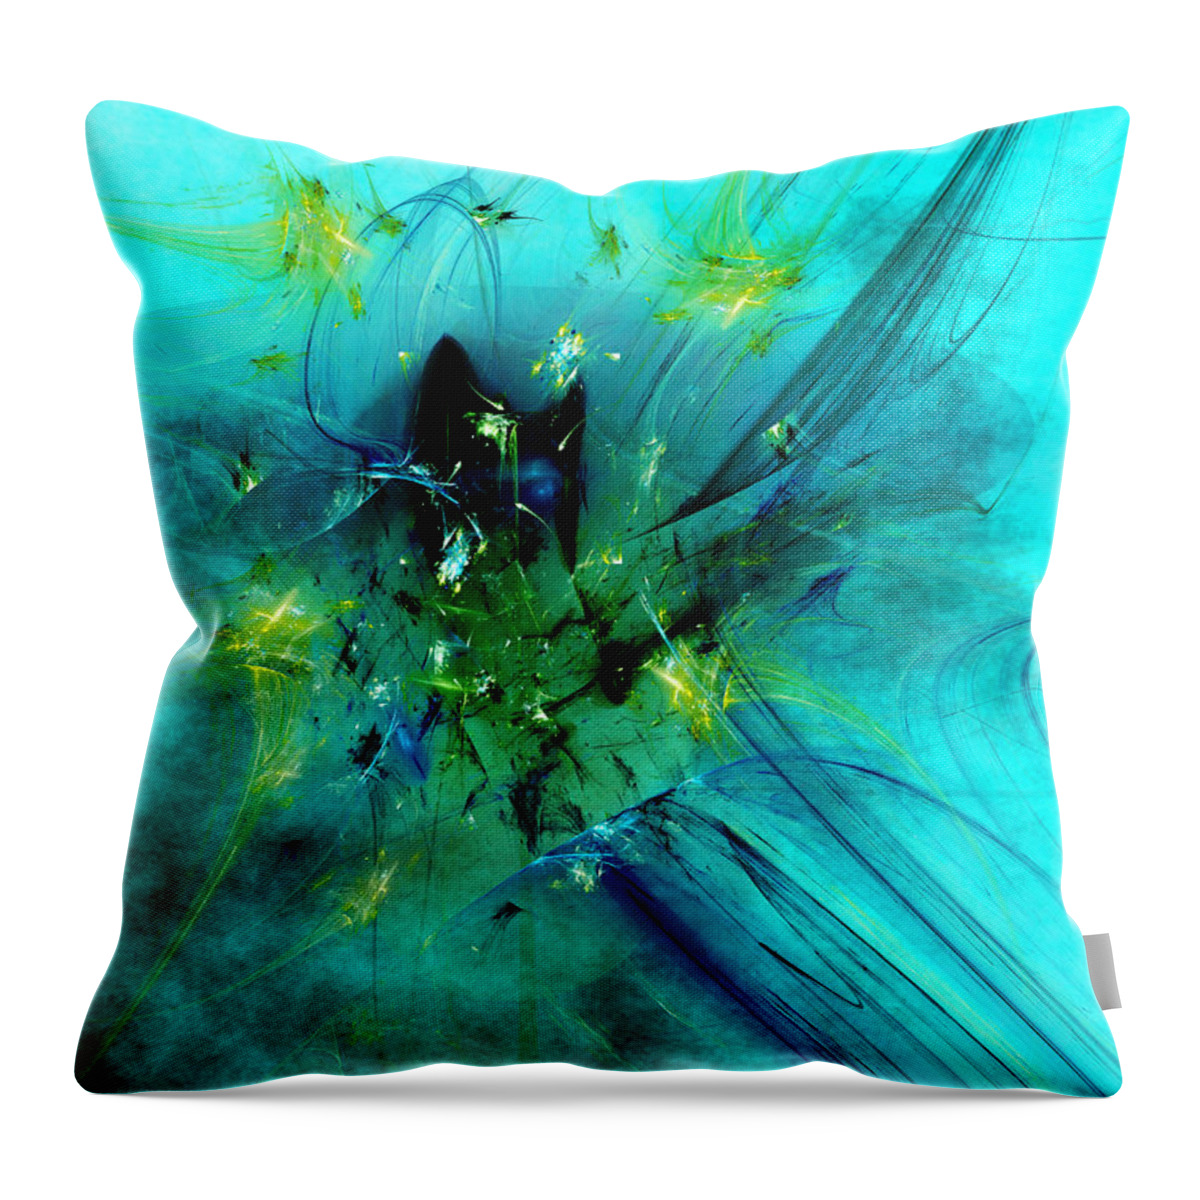 Art Throw Pillow featuring the digital art Remember Two Things by Jeff Iverson